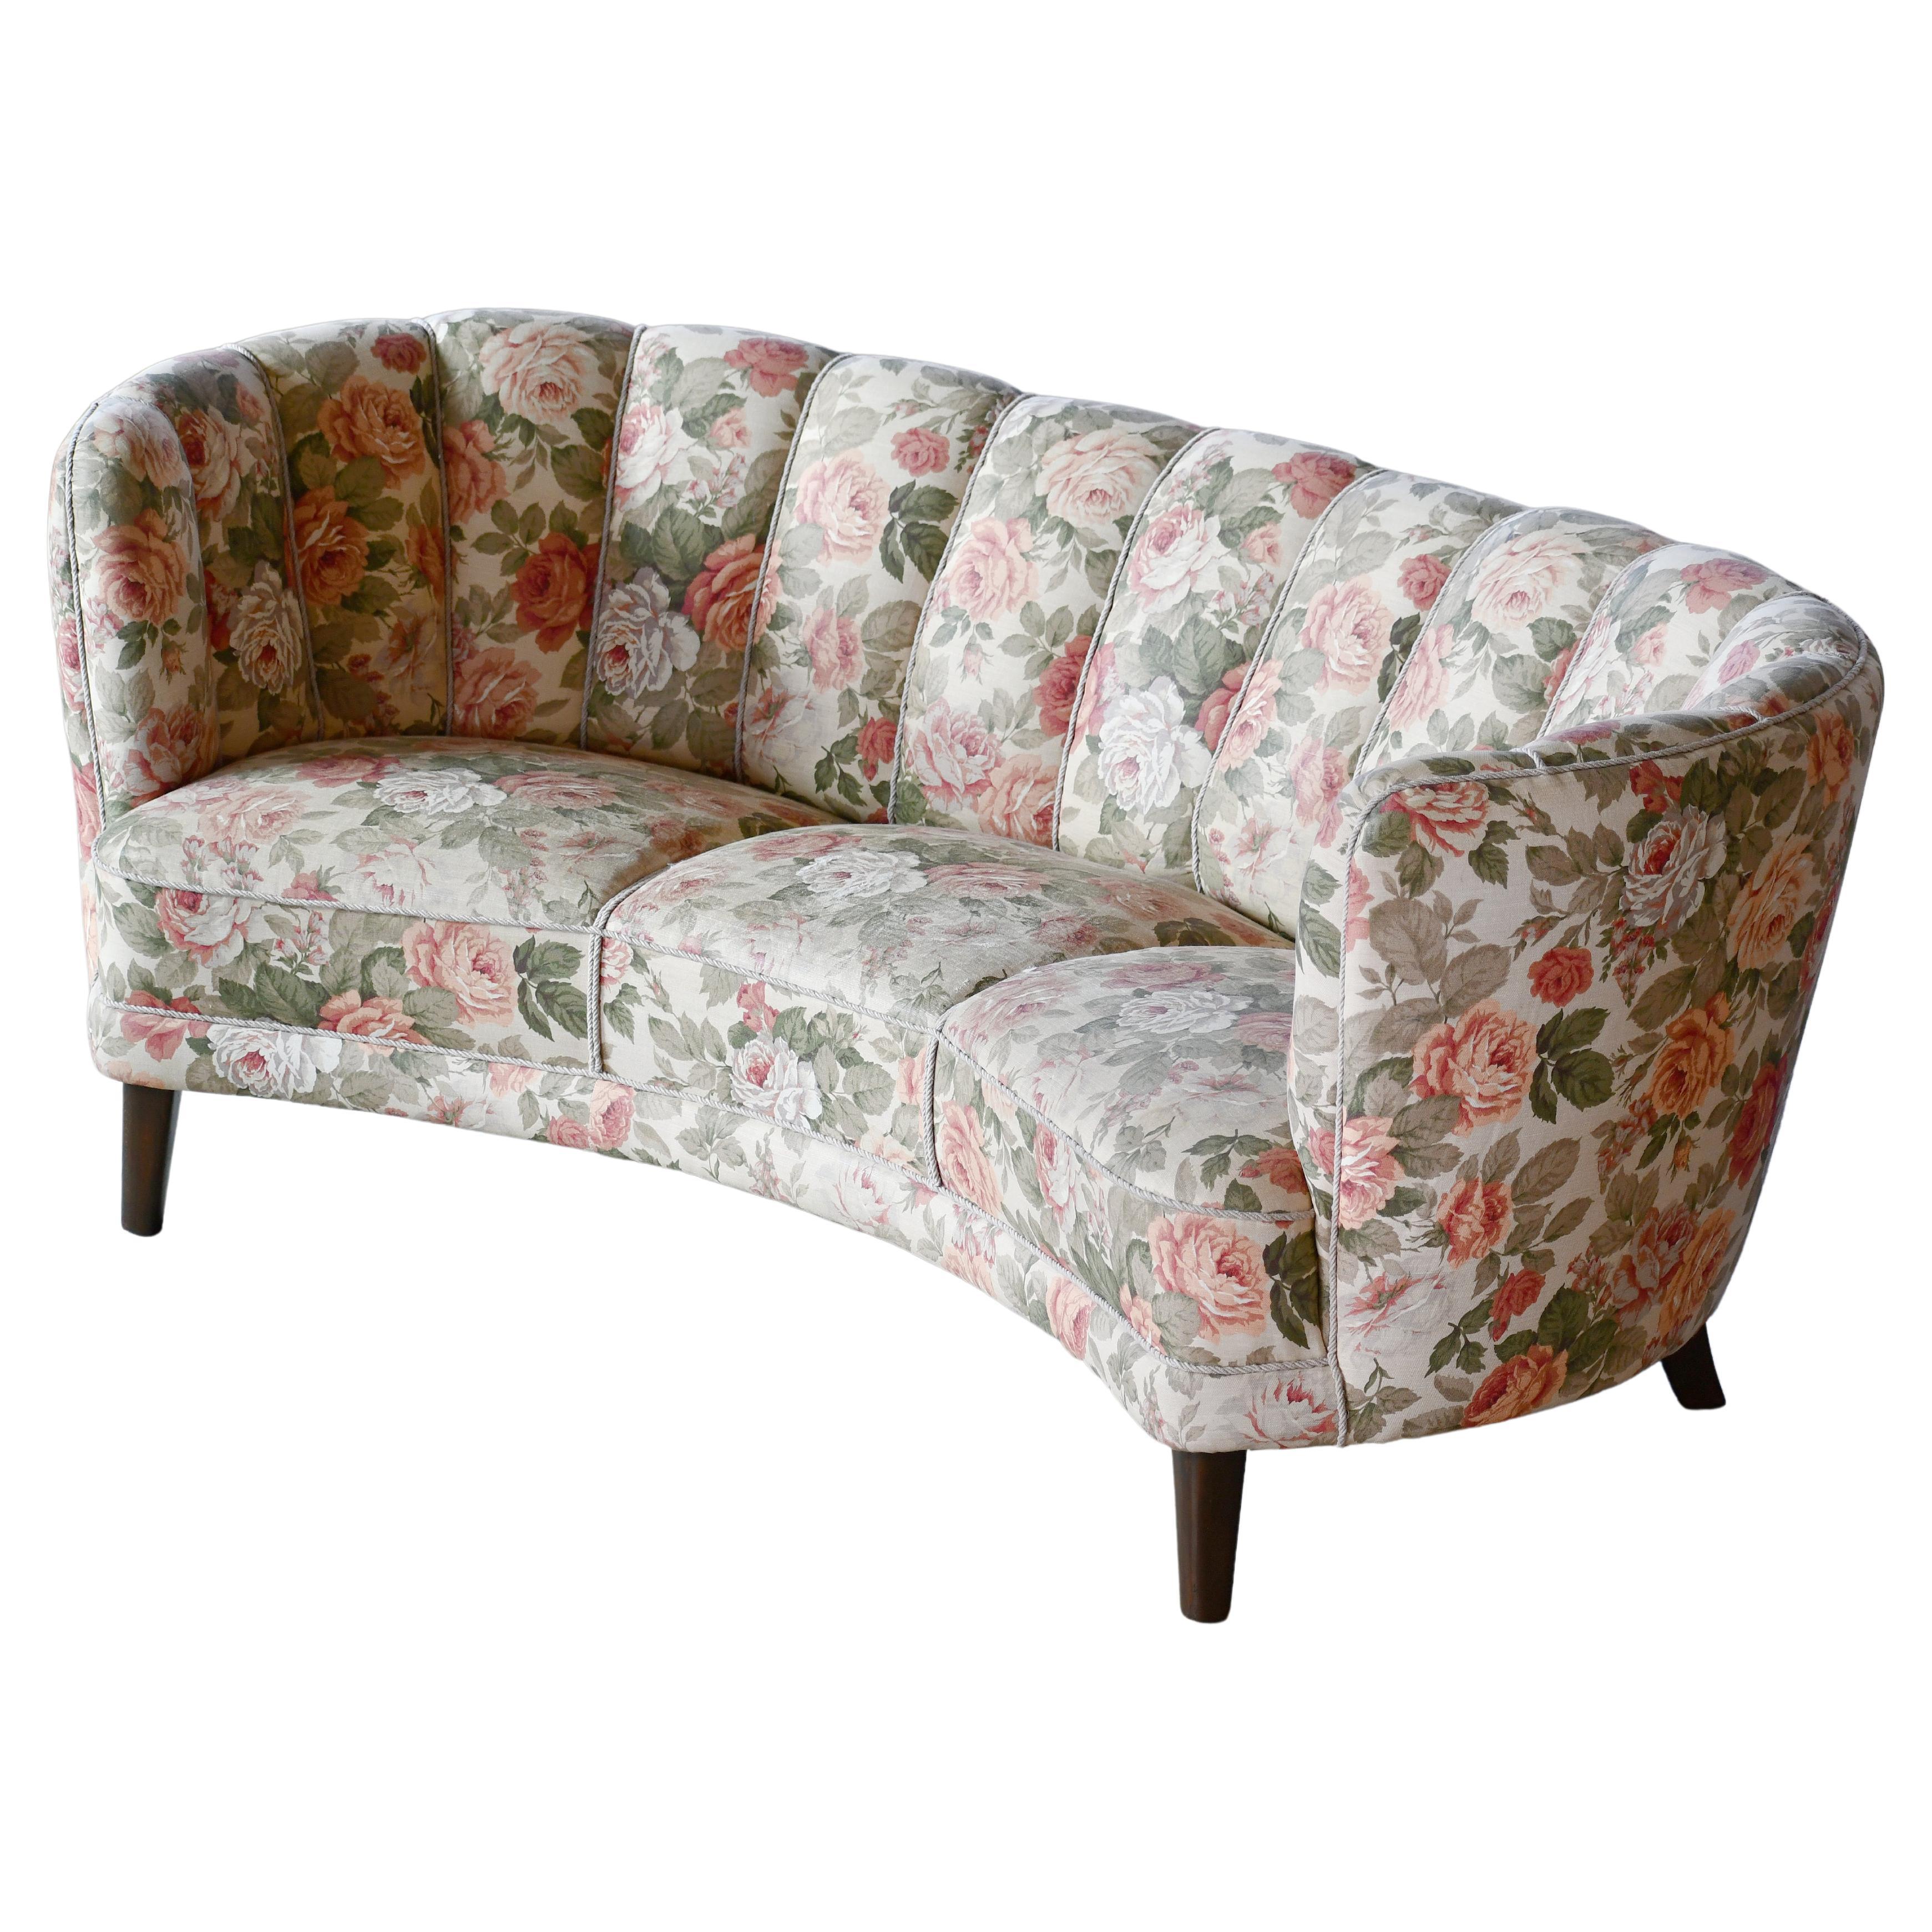 Danish 1940s Large Banana Form Curved Sofa in Floral Fabric